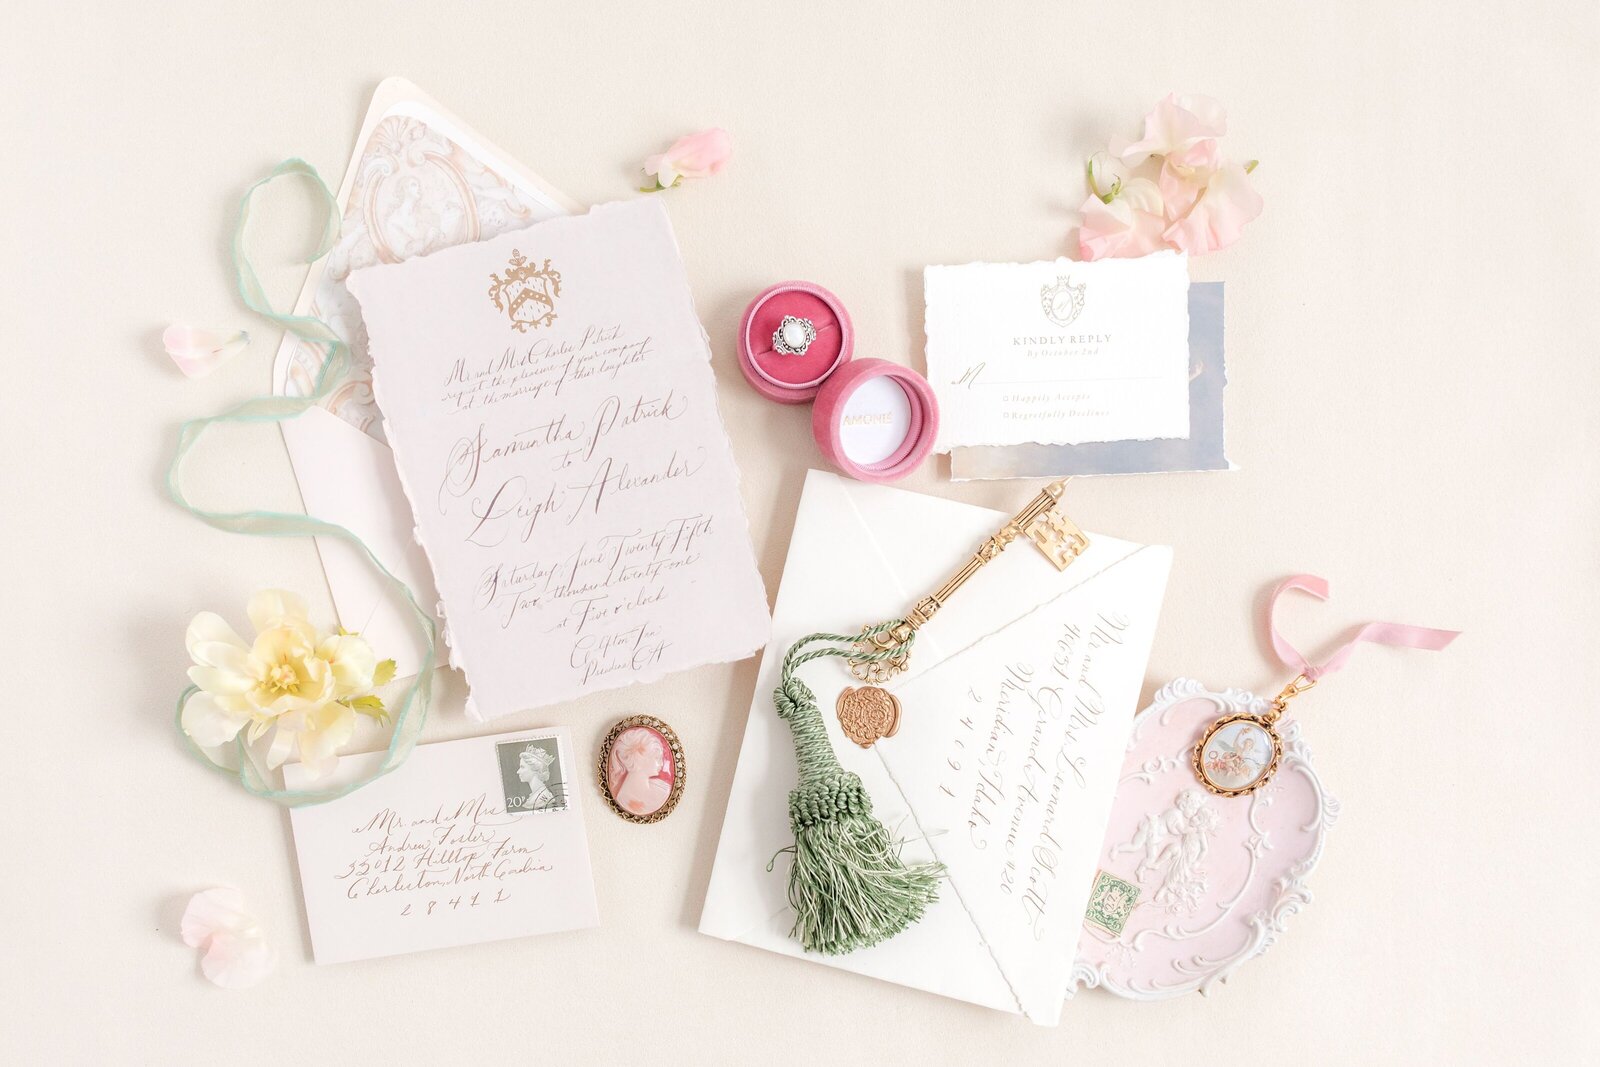 elegant invitation styled neatly with engagement ring and antique accessories